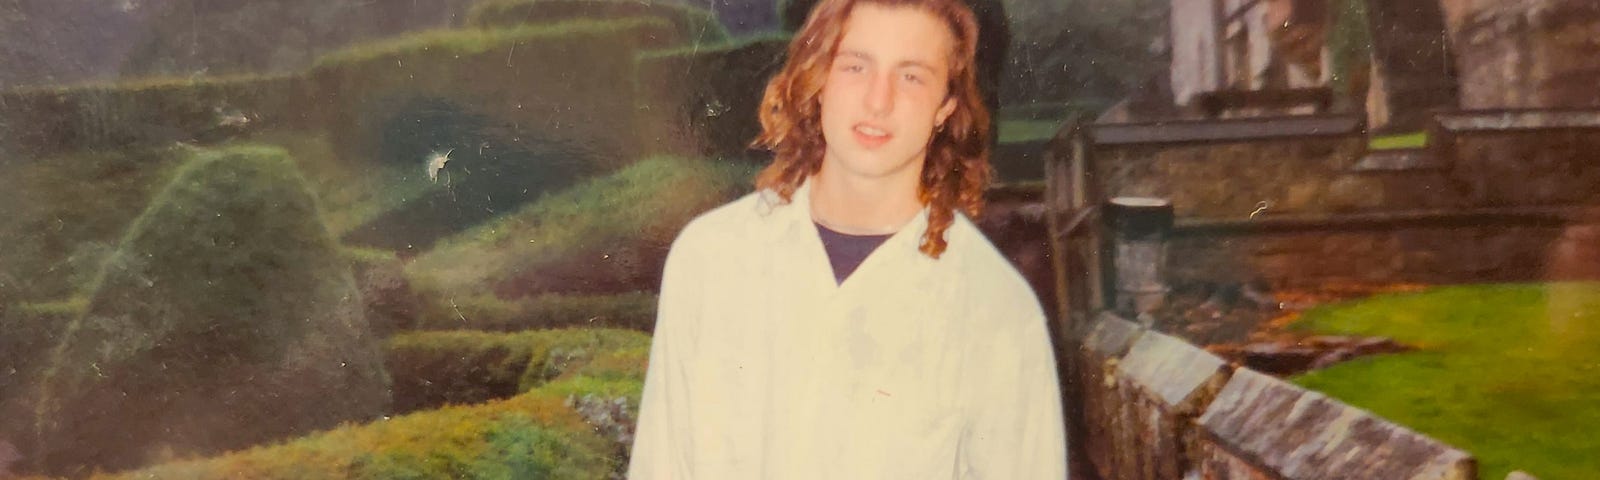 Teenage Gentry Bronson during the late 1980s with long hair